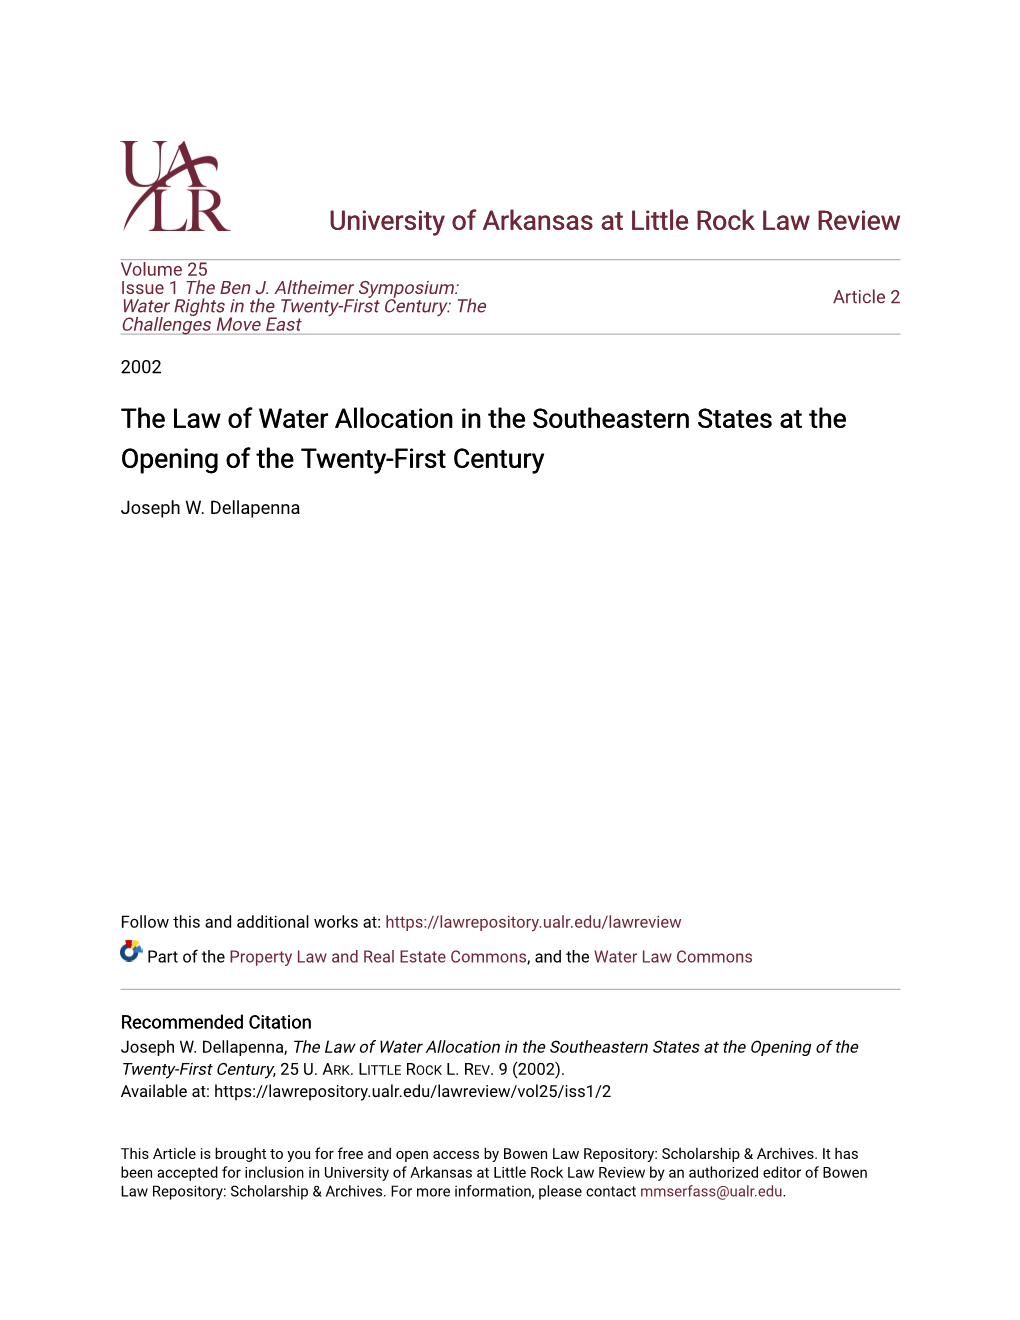 The Law of Water Allocation in the Southeastern States at the Opening of the Twenty-First Century